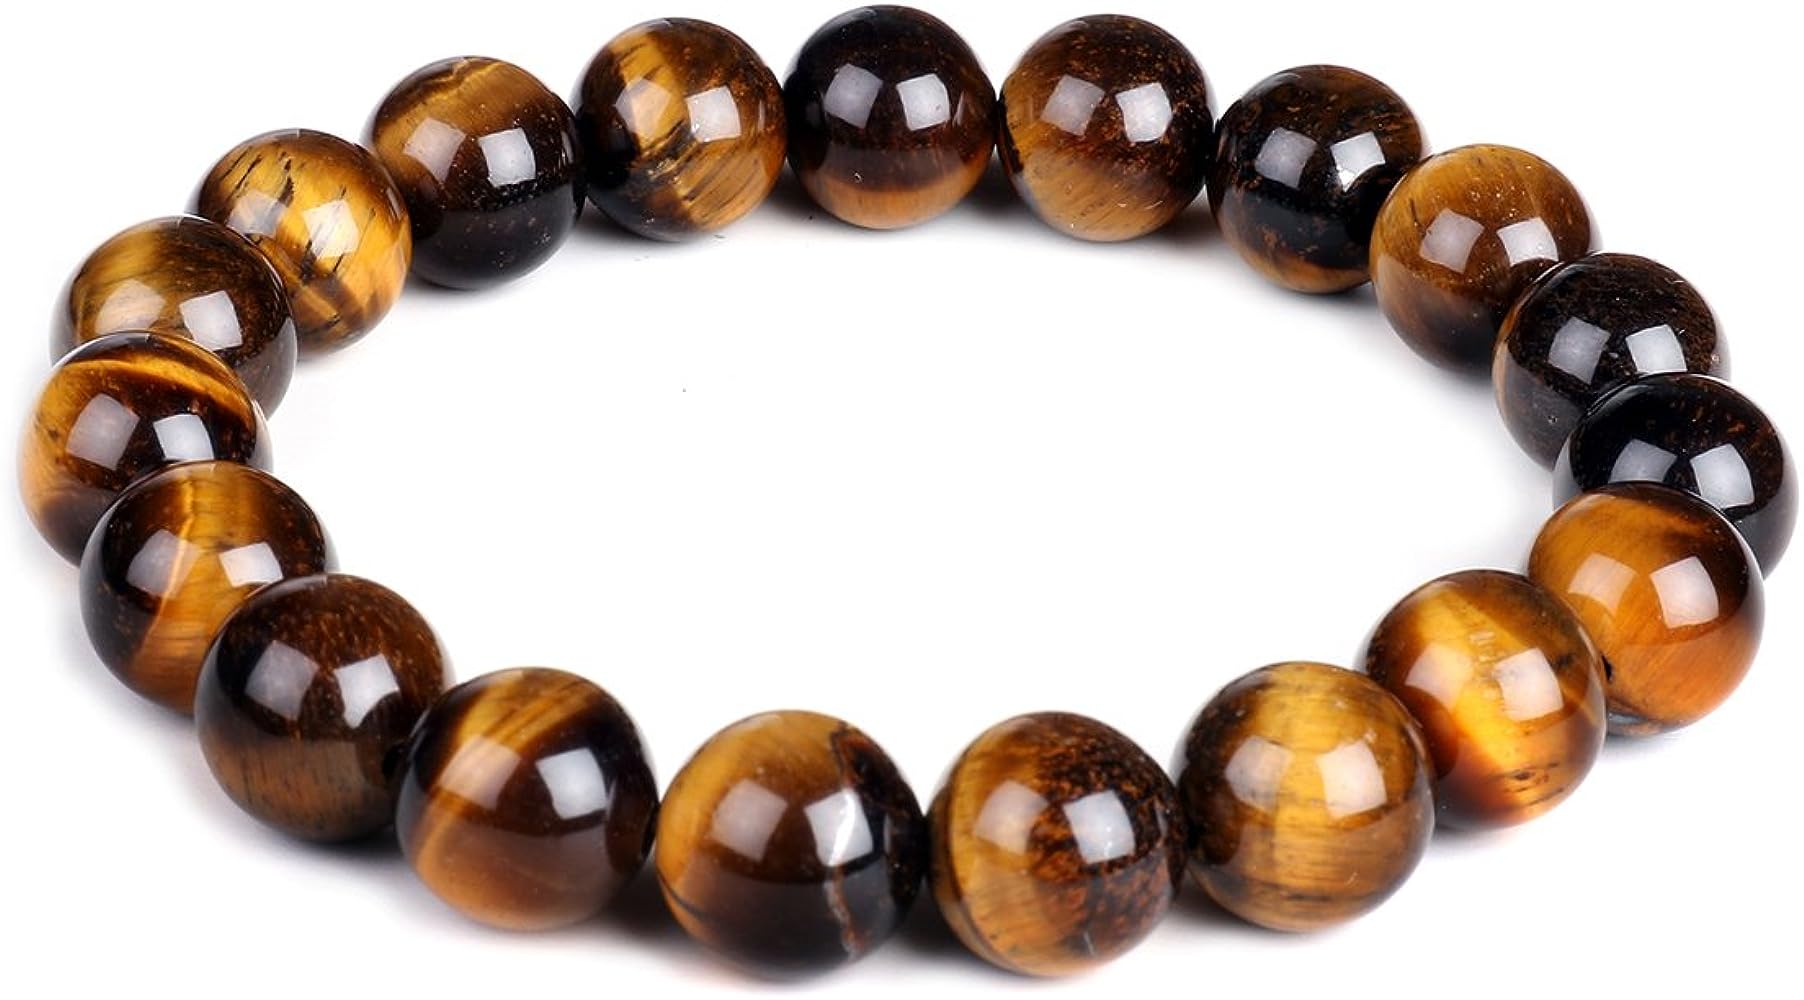 15 Benefits of Tiger Eye Stone, Meaning, Original Test, Types, How to Wear